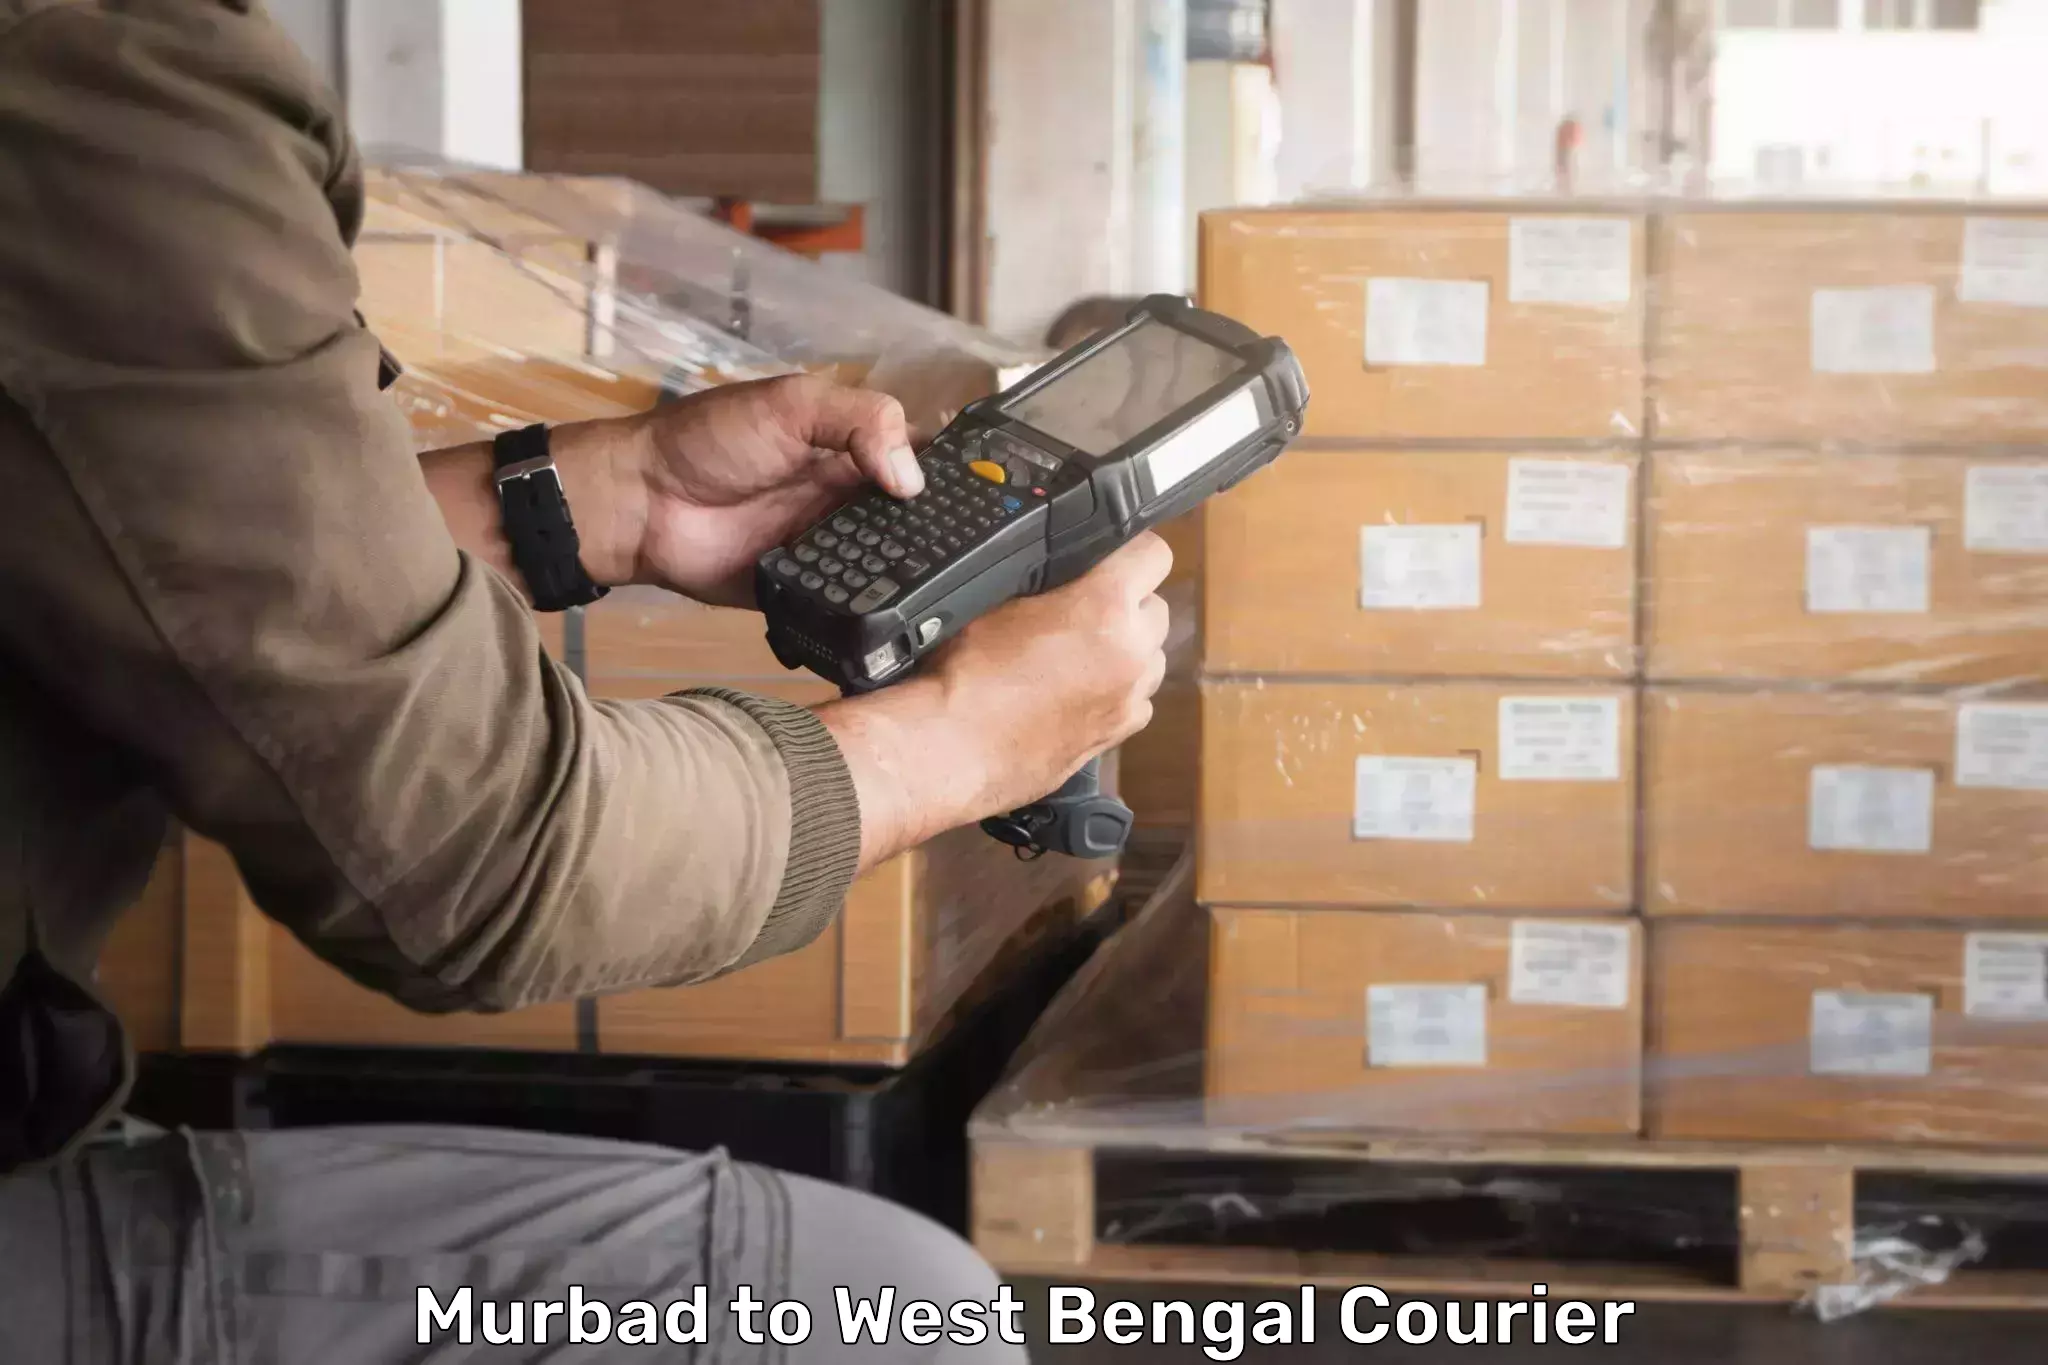 Professional courier handling Murbad to IIT Kharagpur